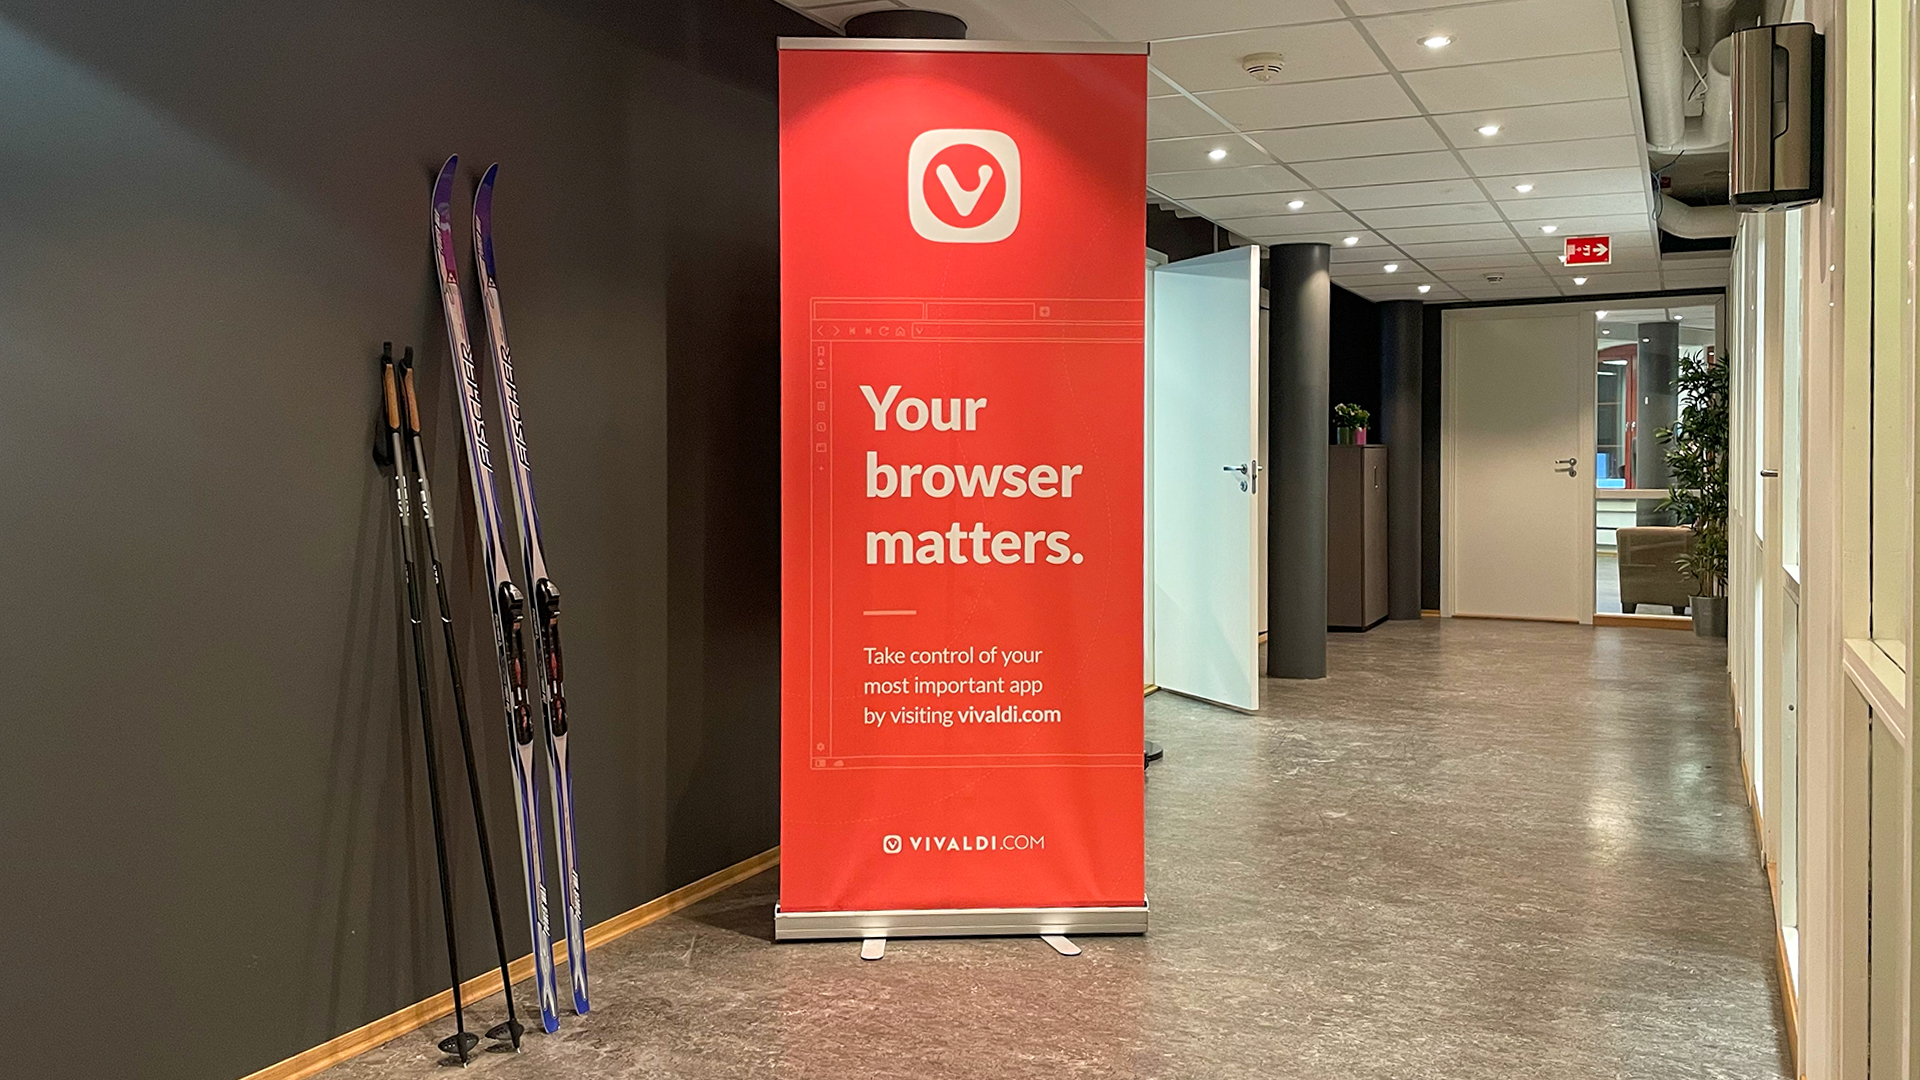 Skis next to a Vivaldi browser banner in an office environment